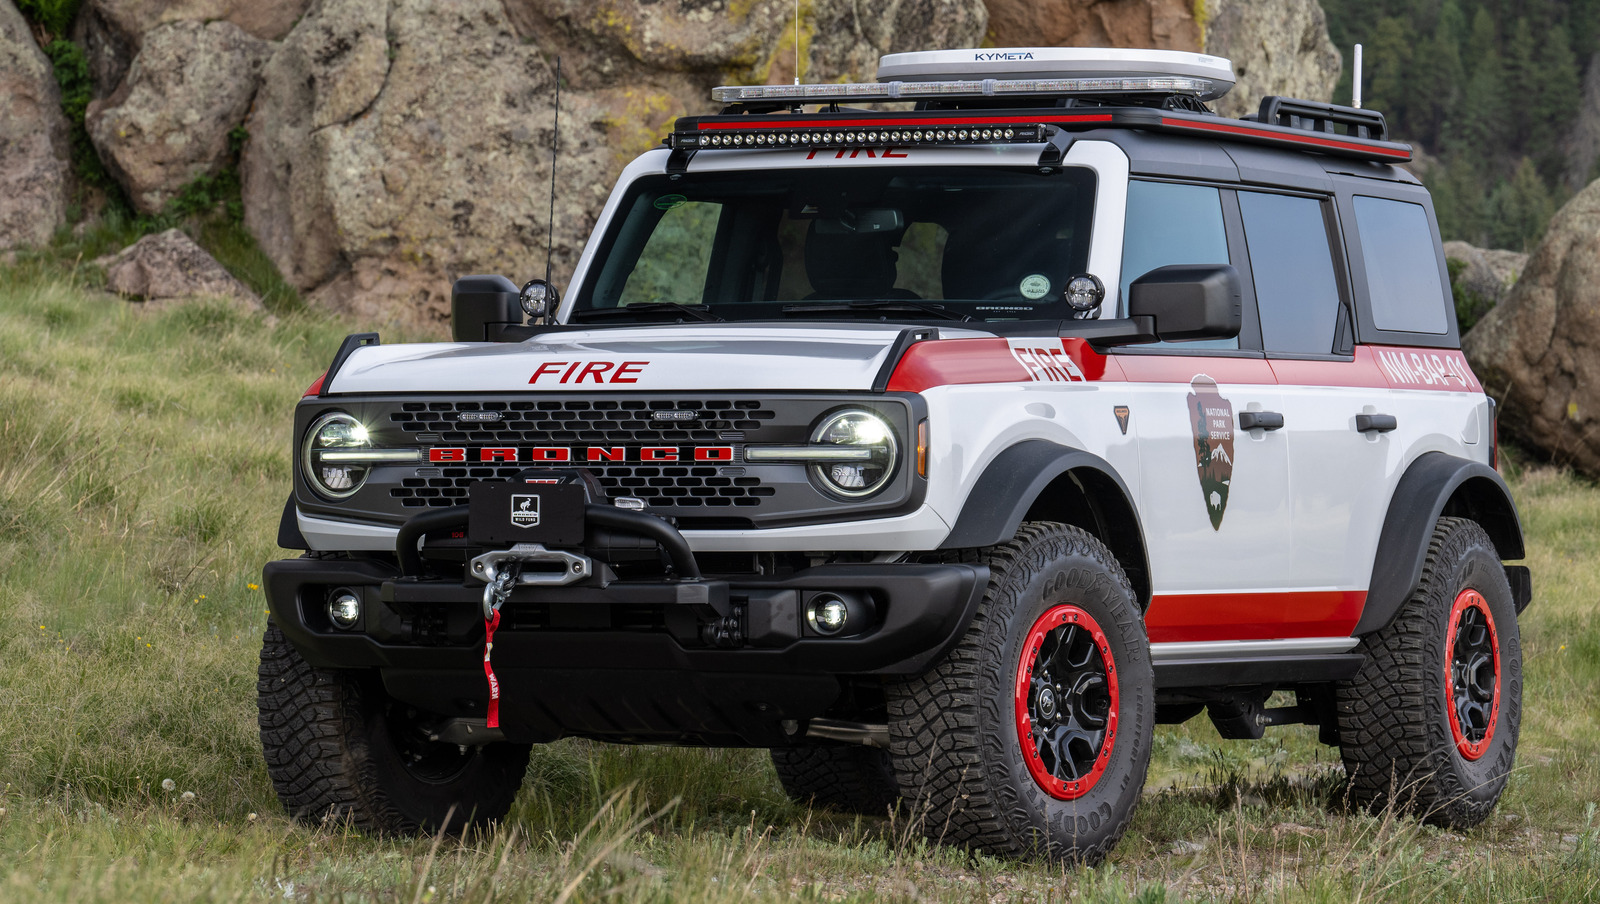 This Red-Hot Custom Bronco Is Ford’s Blueprint For National Park Fire Safety – SlashGear